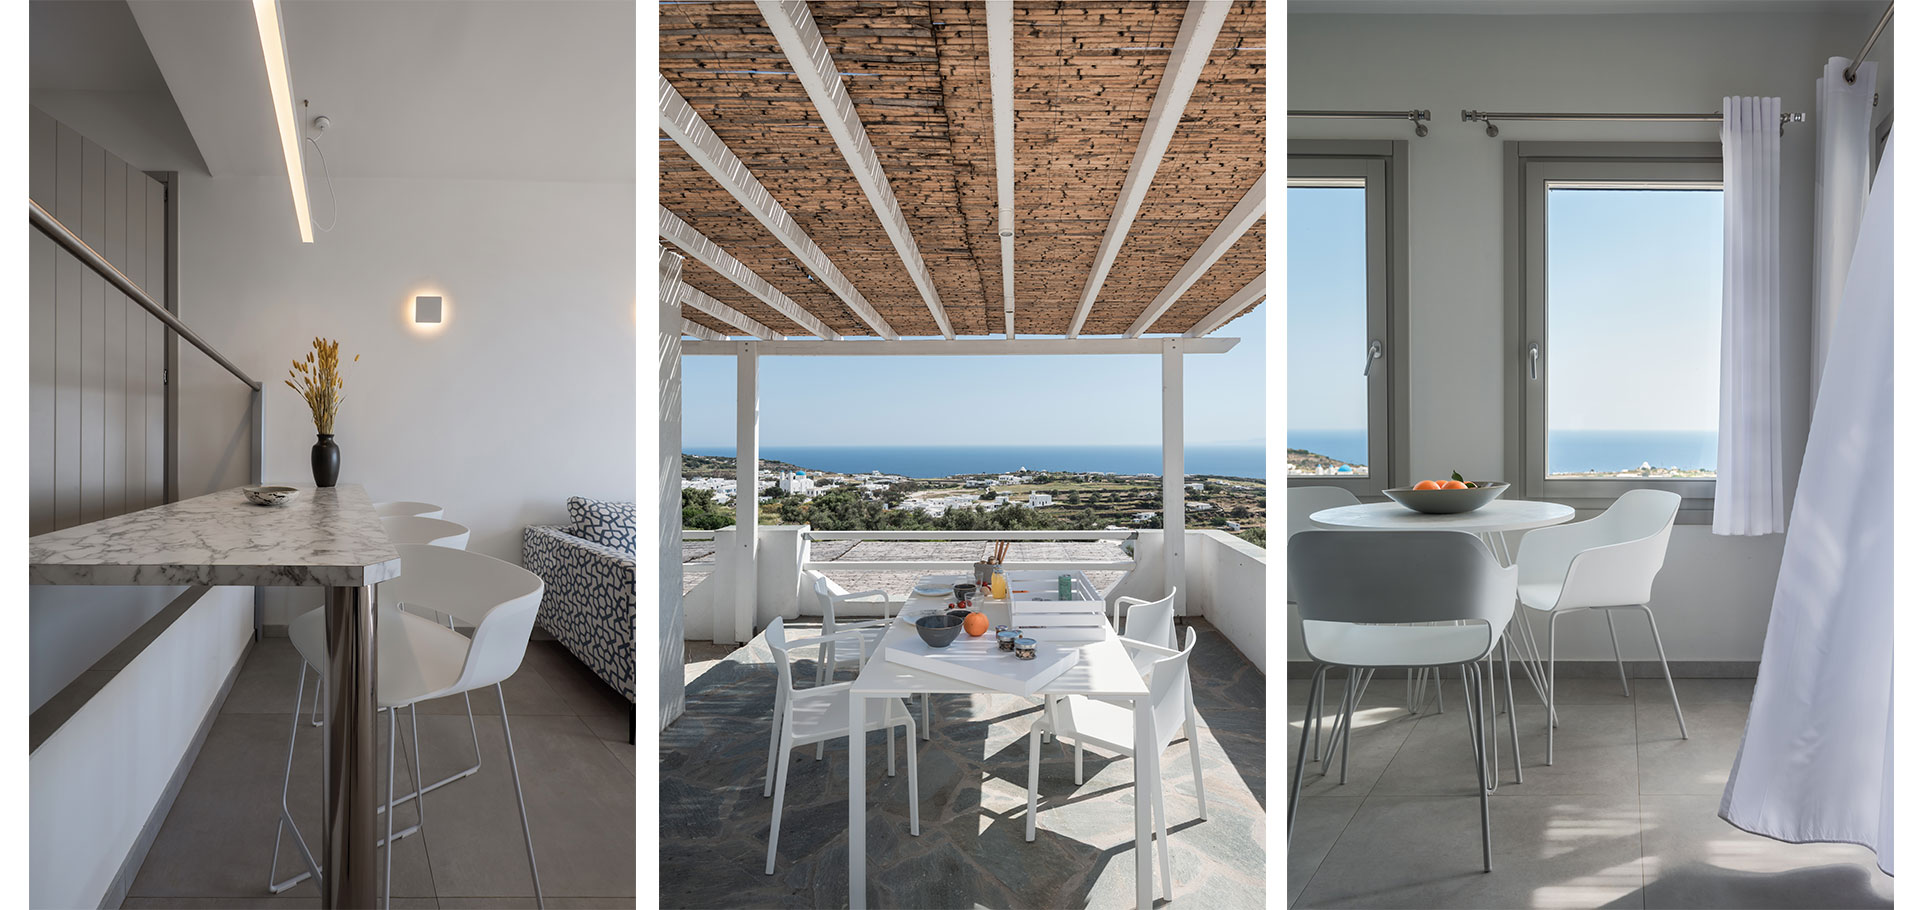 The view and the interior of the Executive apartment in Sifnos